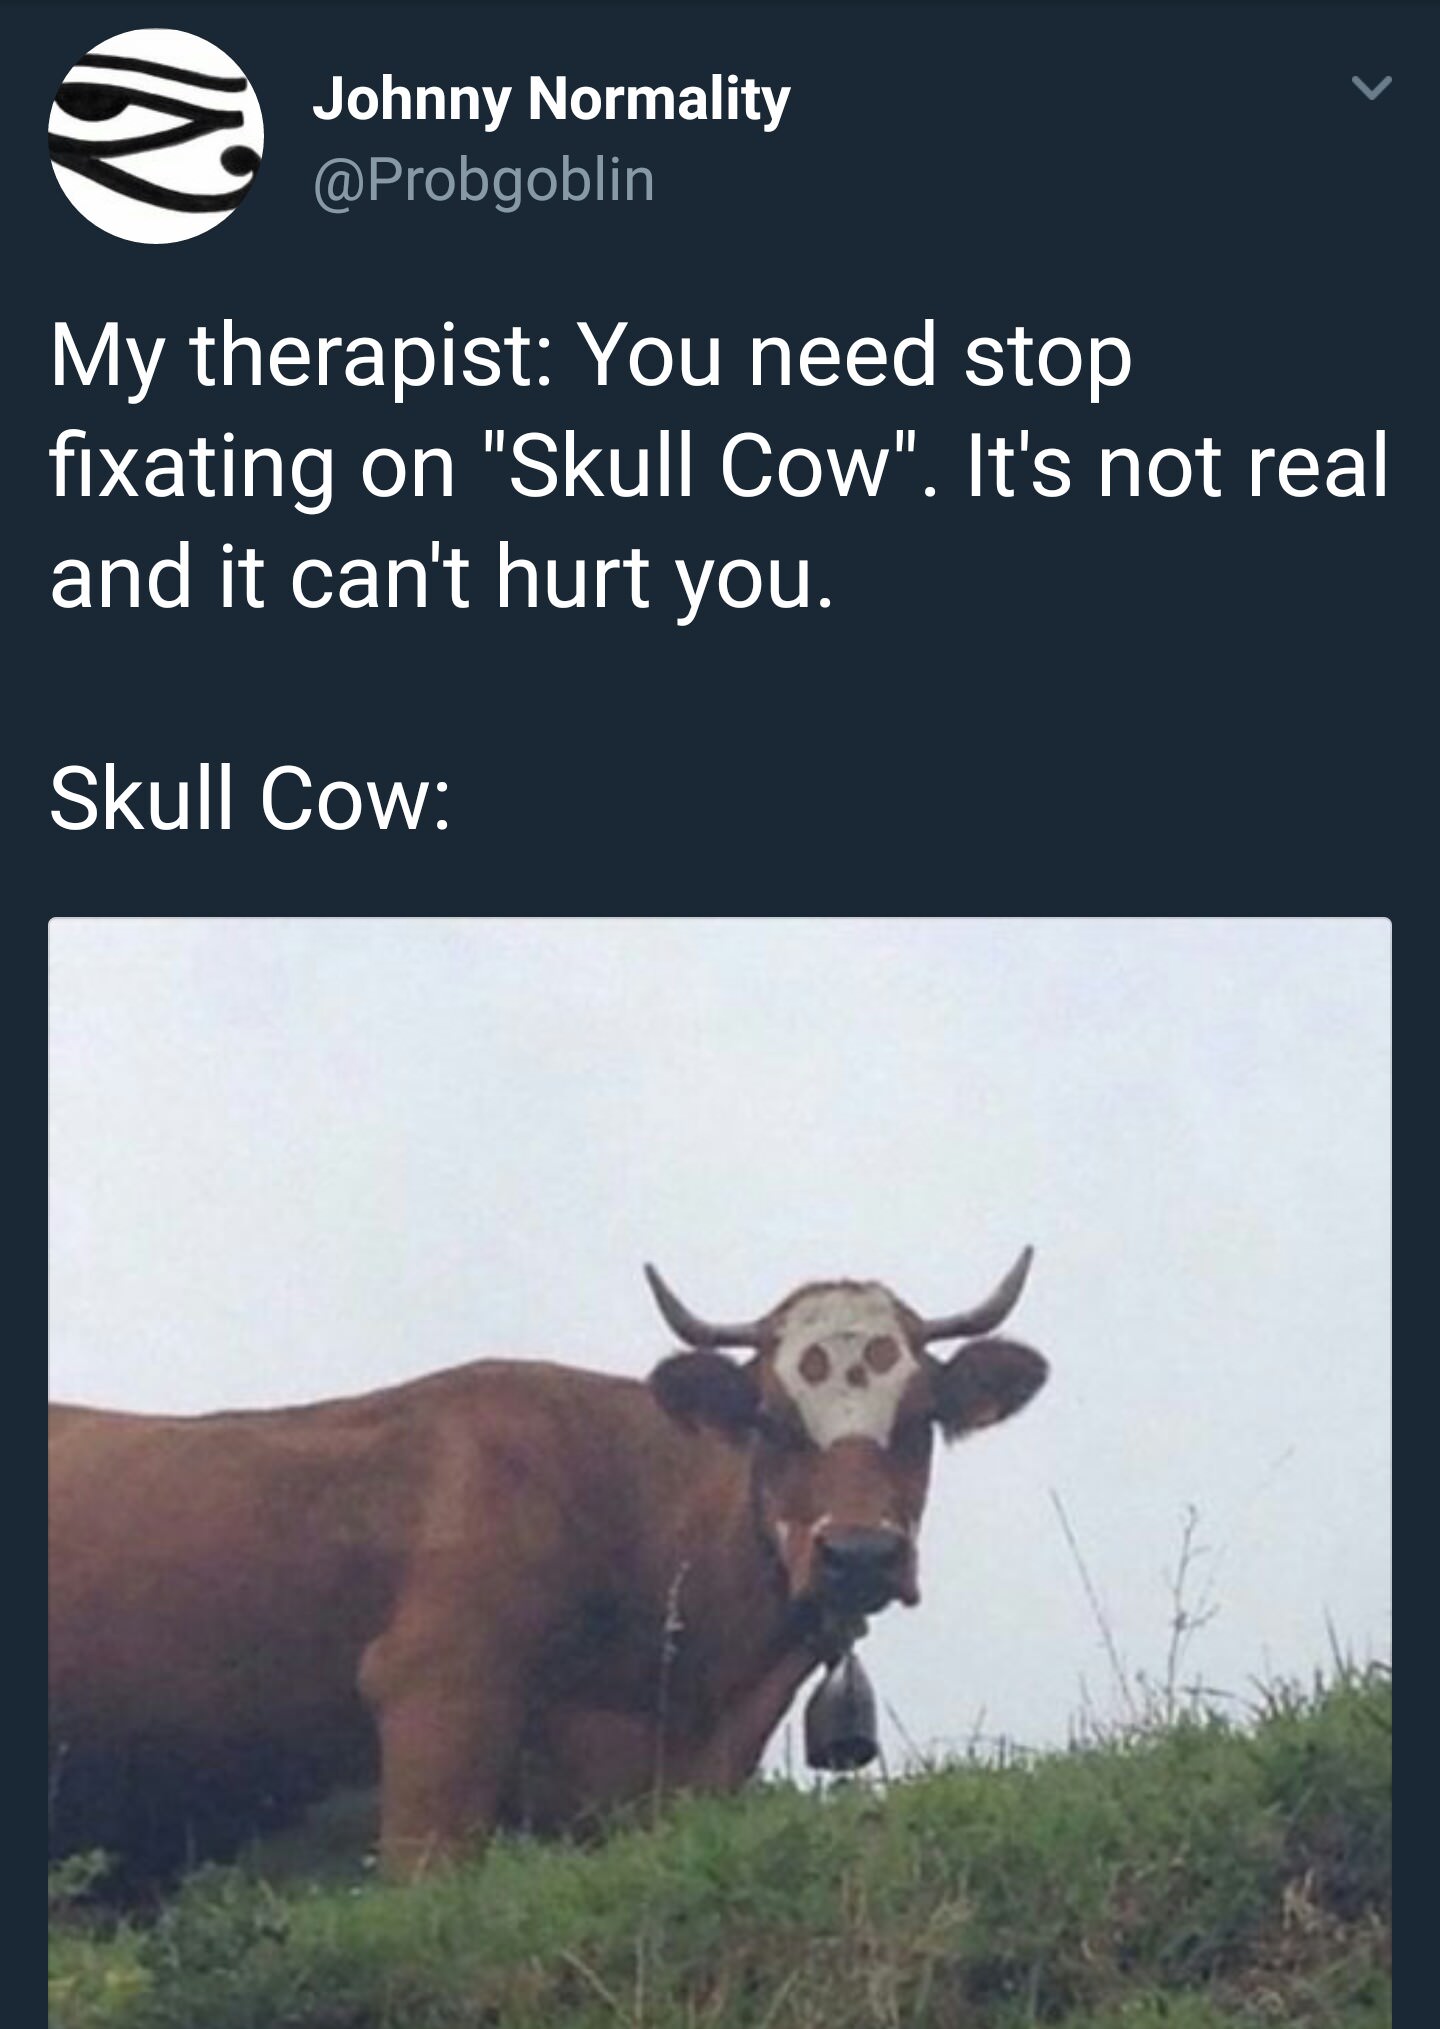 cow memes - Johnny Normality My therapist You need stop fixating on "Skull Cow". It's not real and it can't hurt you. Skull Cow